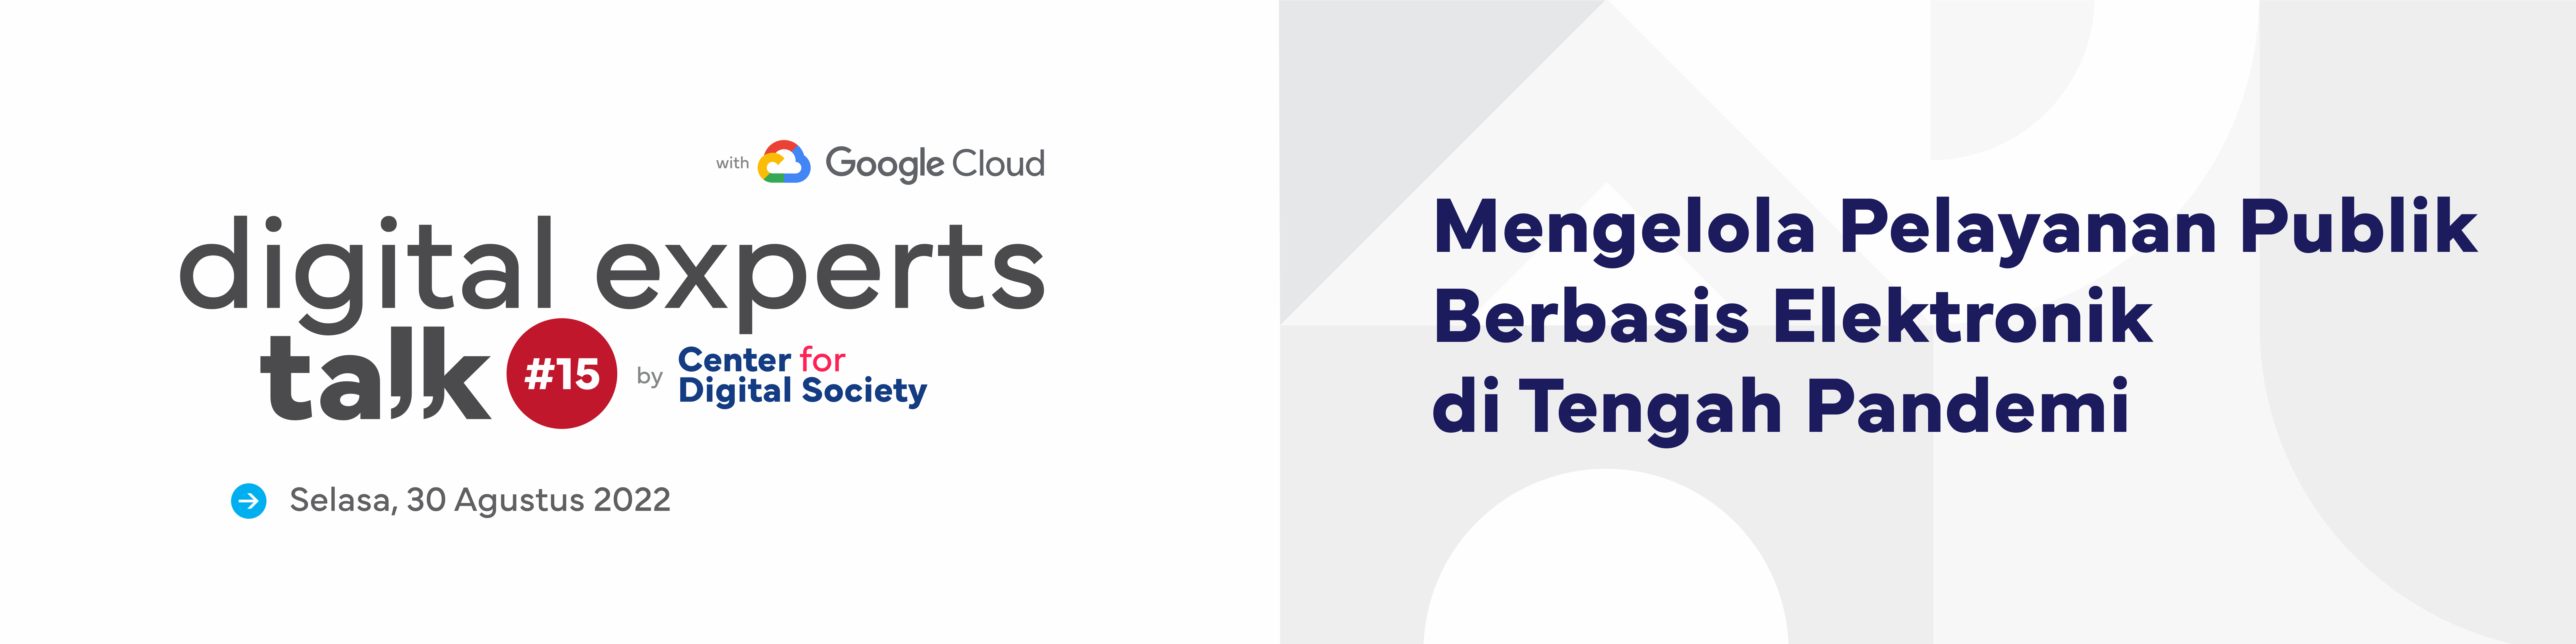 [PRESS RELEASE] Kemenkes, Kominfo, CfDS & Google Encourage the Optimization and the Efficiency of Digital Public Service in Indonesia | Digital Experts Talk #15